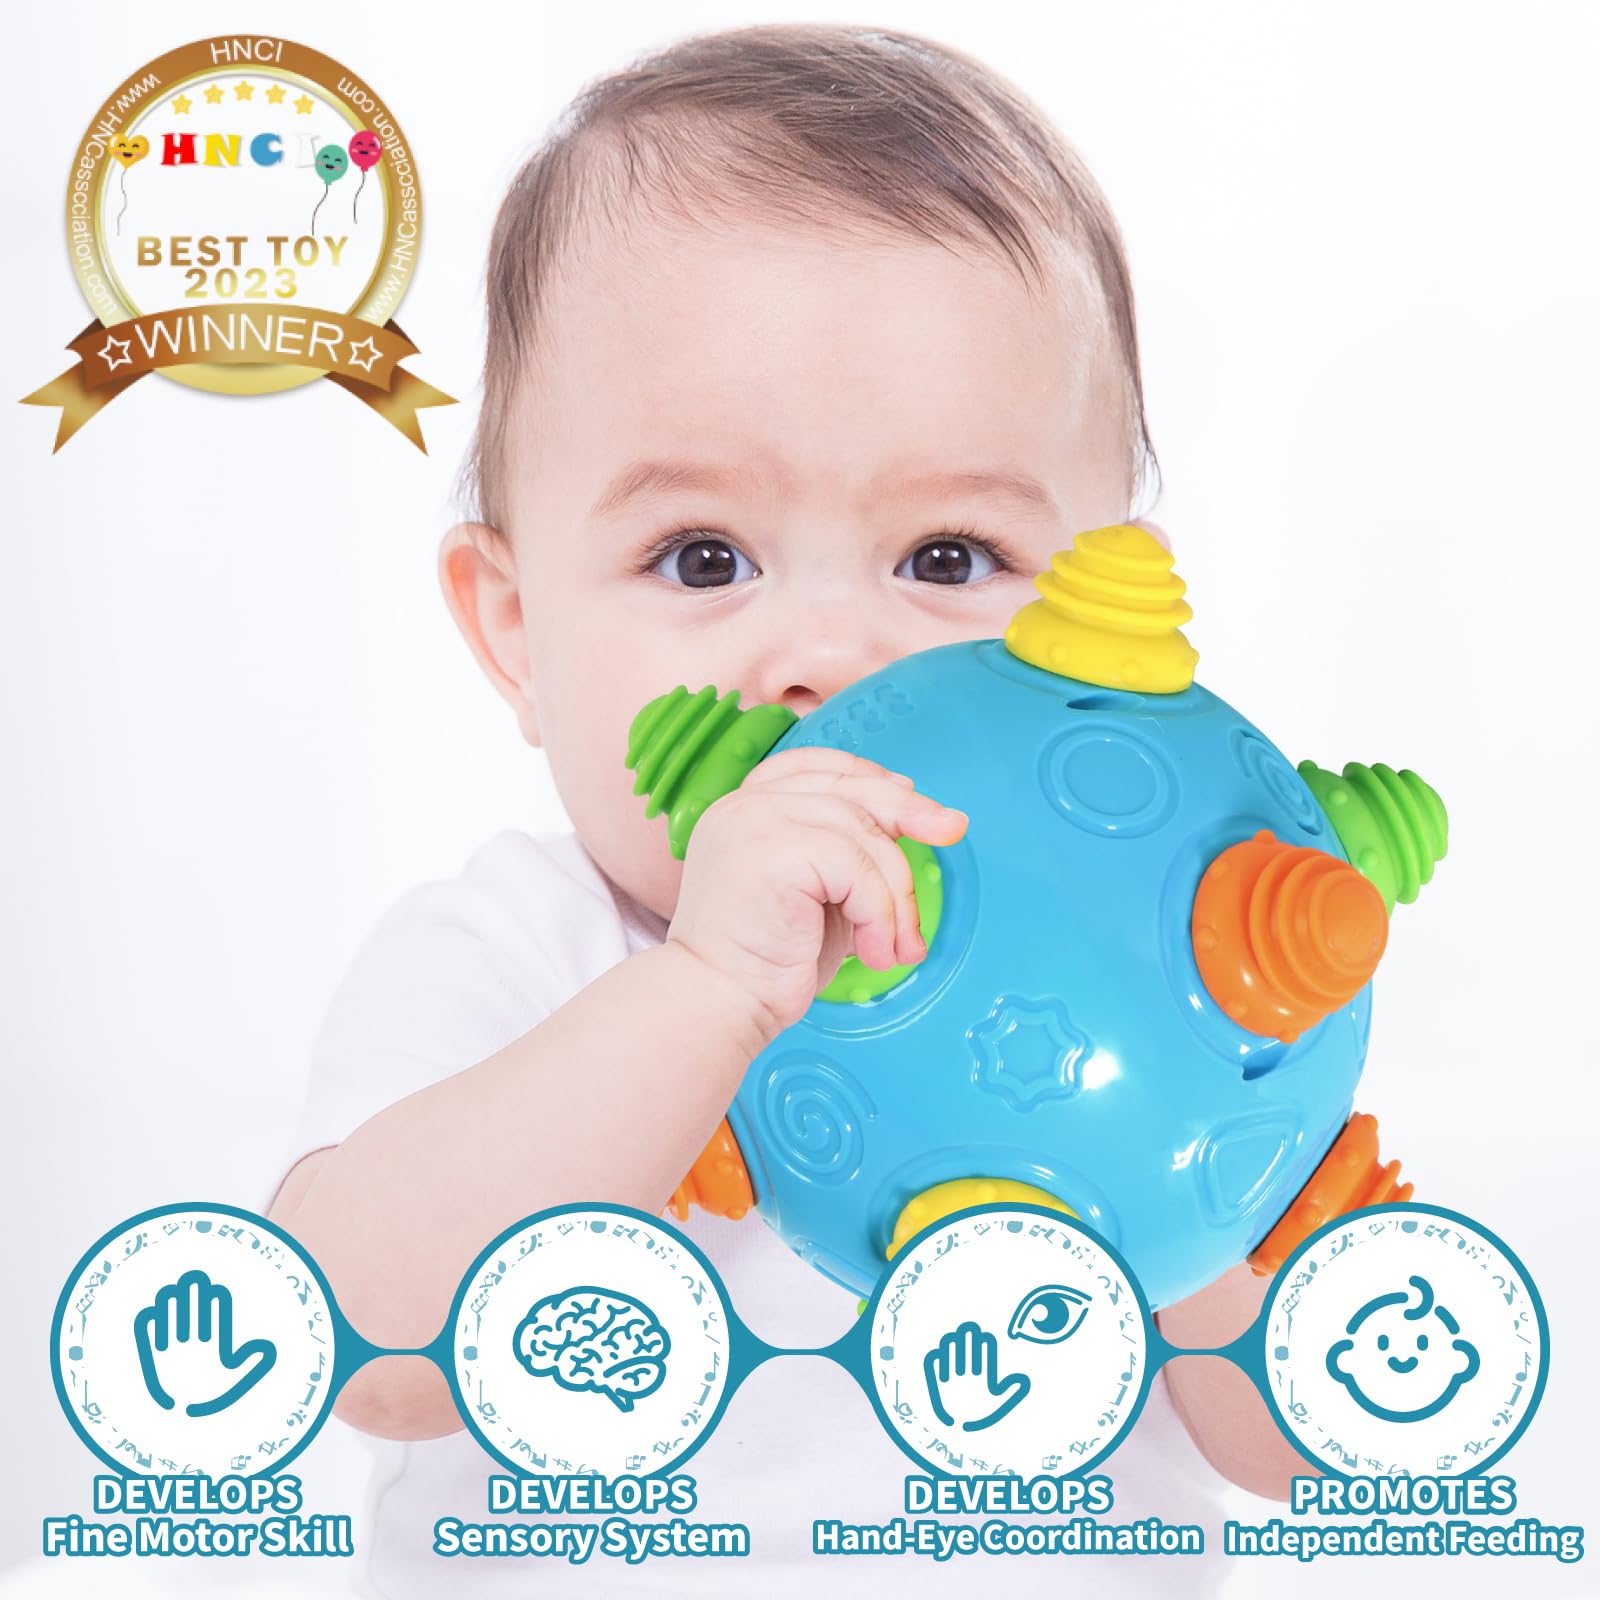 VANLINNY NEW Bumble Ball for Babies,Crawling Sensory Toys for Toddlers,Baby Music Shake Preschool Toys,Dancing Interactive Sounds Infants Toy,Bouncing Learning Ball,Ideal Gift for Boys Girls(Blue)